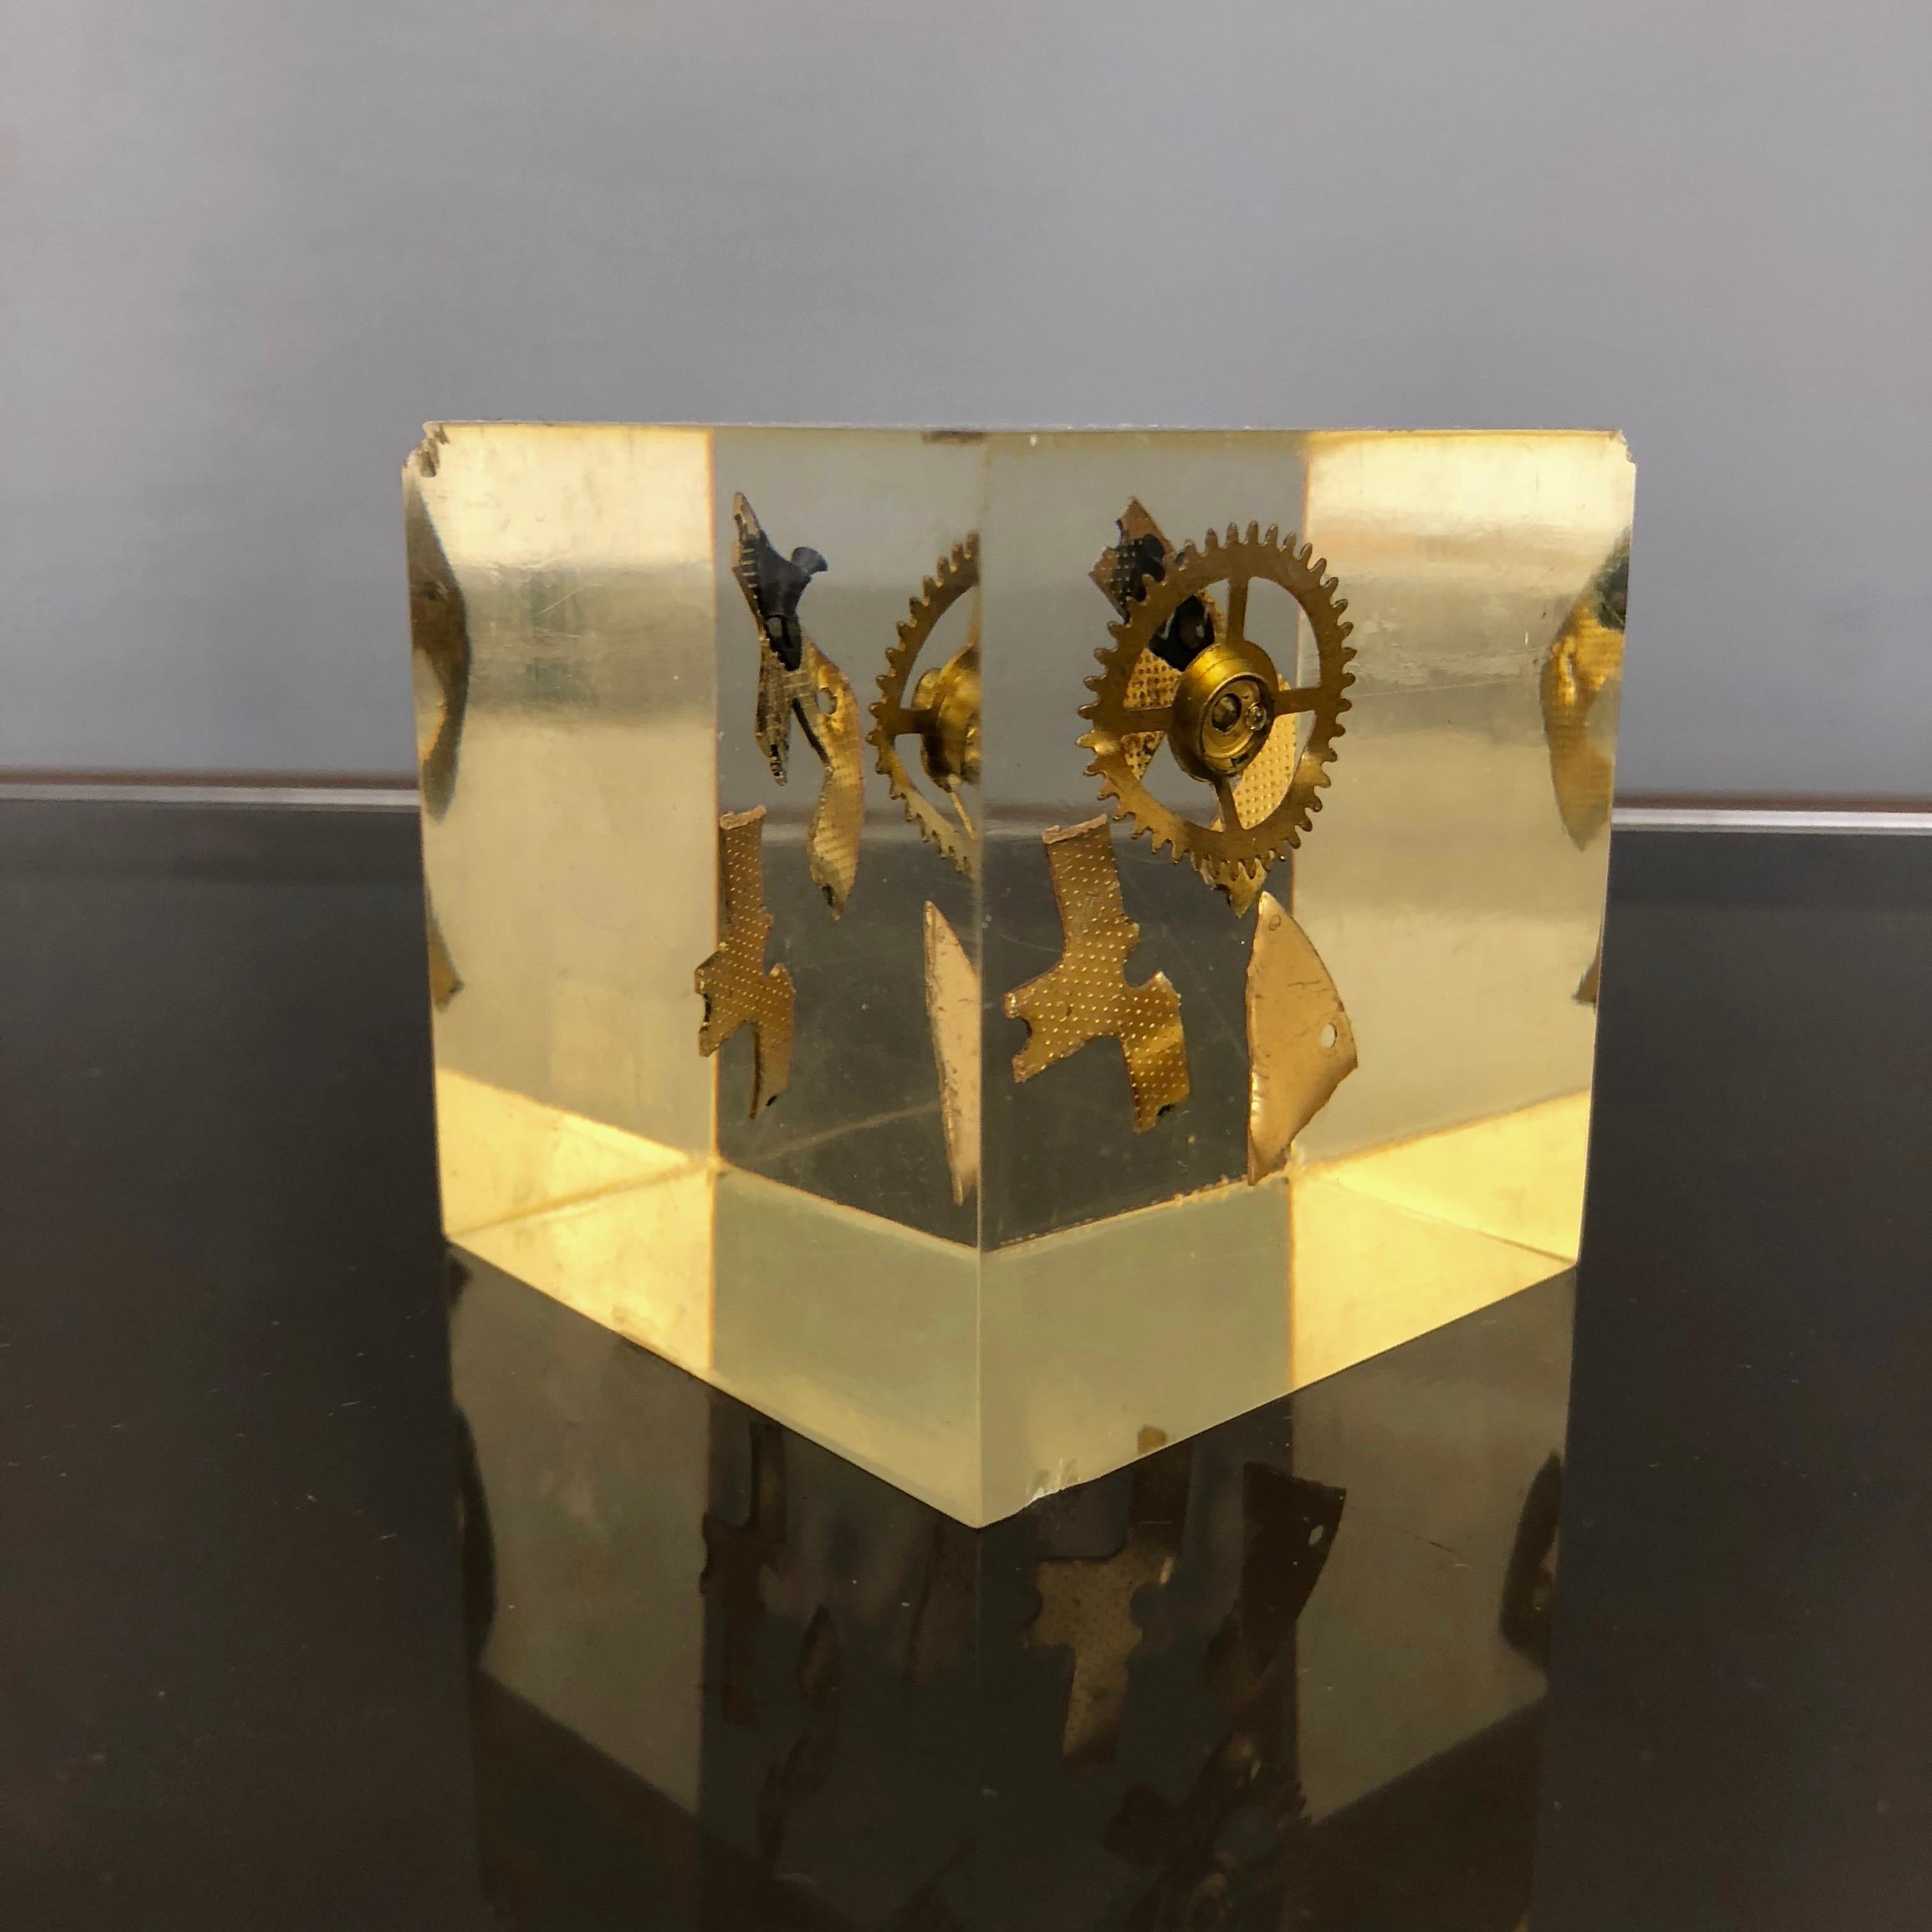 Lucite resin cube with gears inside attributed to Pierre Giraudon, circa 1970.
 